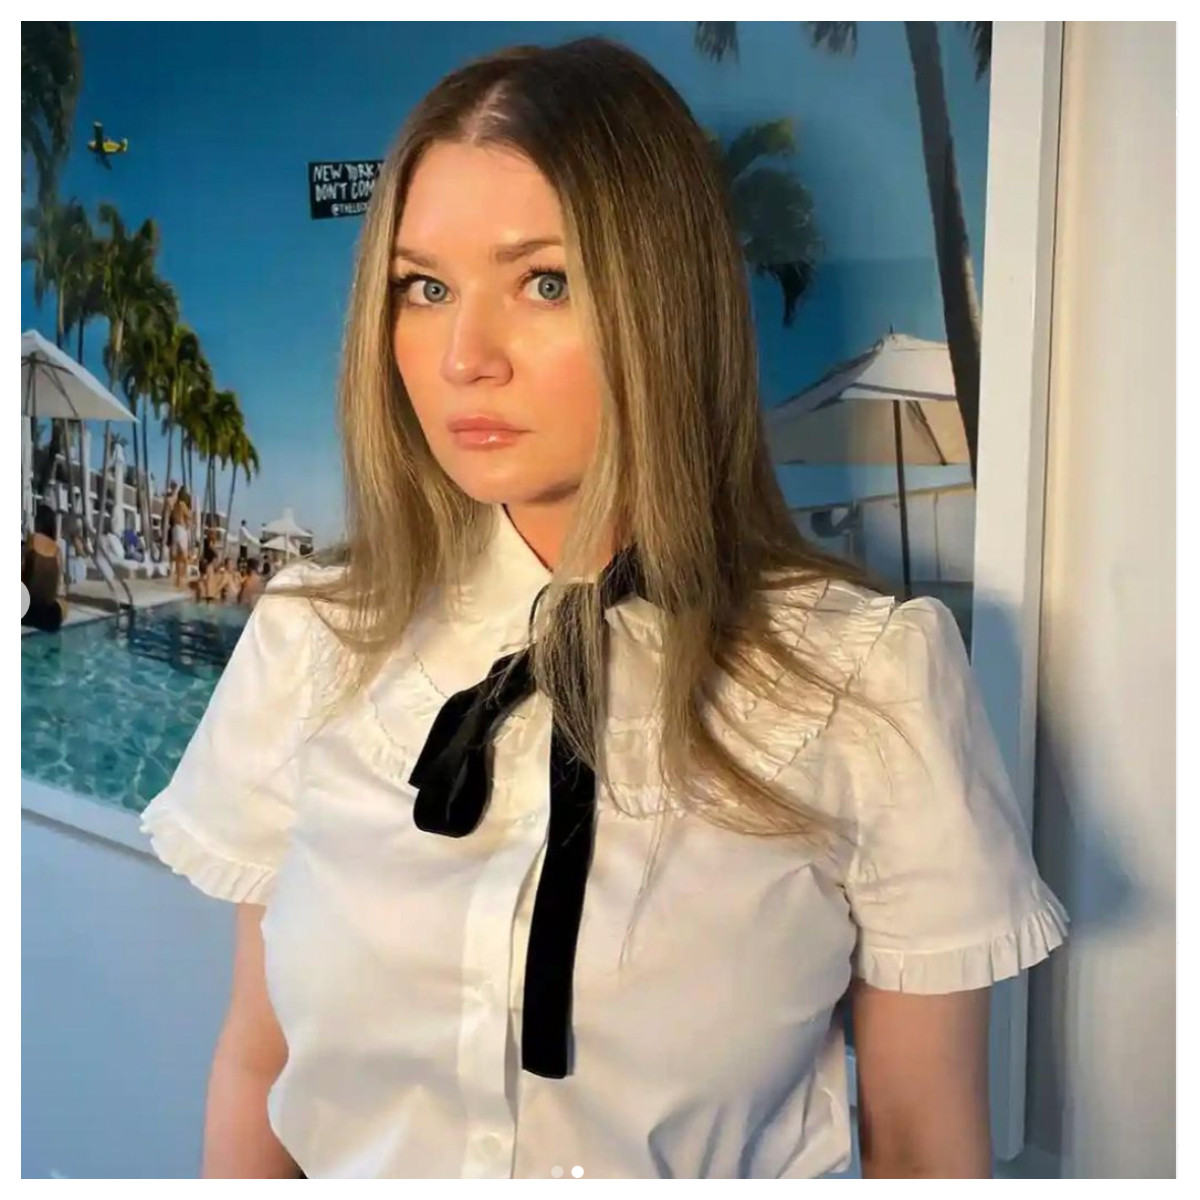 Anna Delvey aka Anna Sorokin is living a surprisingly glamorous life for someone under house arrest. Photo: @thedelveys/Instagram